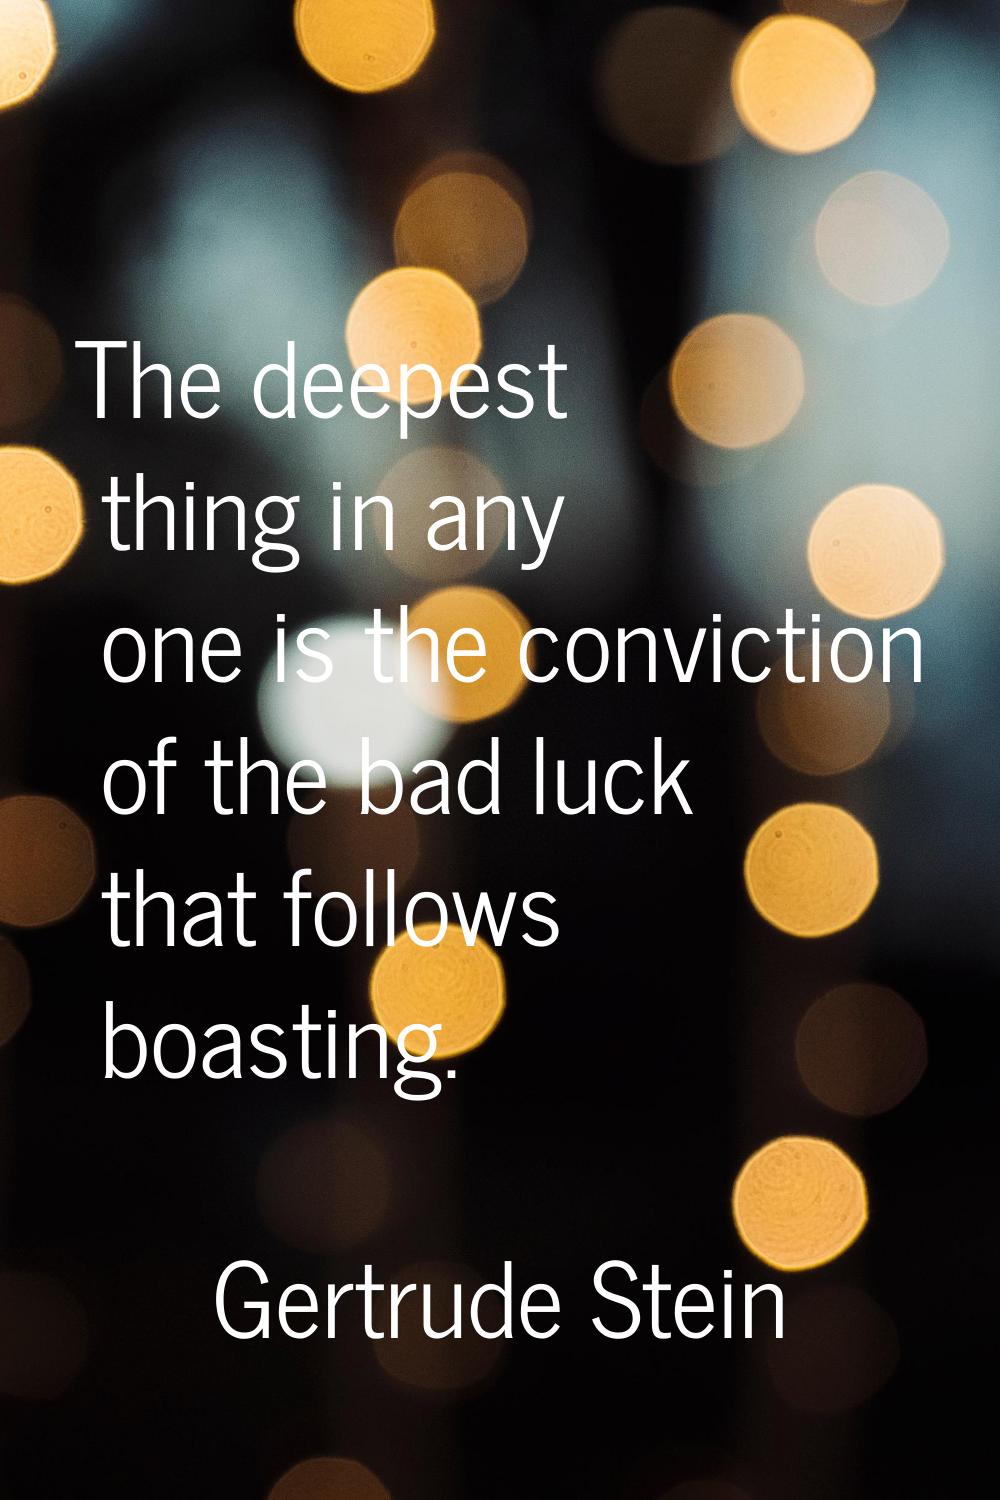 The deepest thing in any one is the conviction of the bad luck that follows boasting.